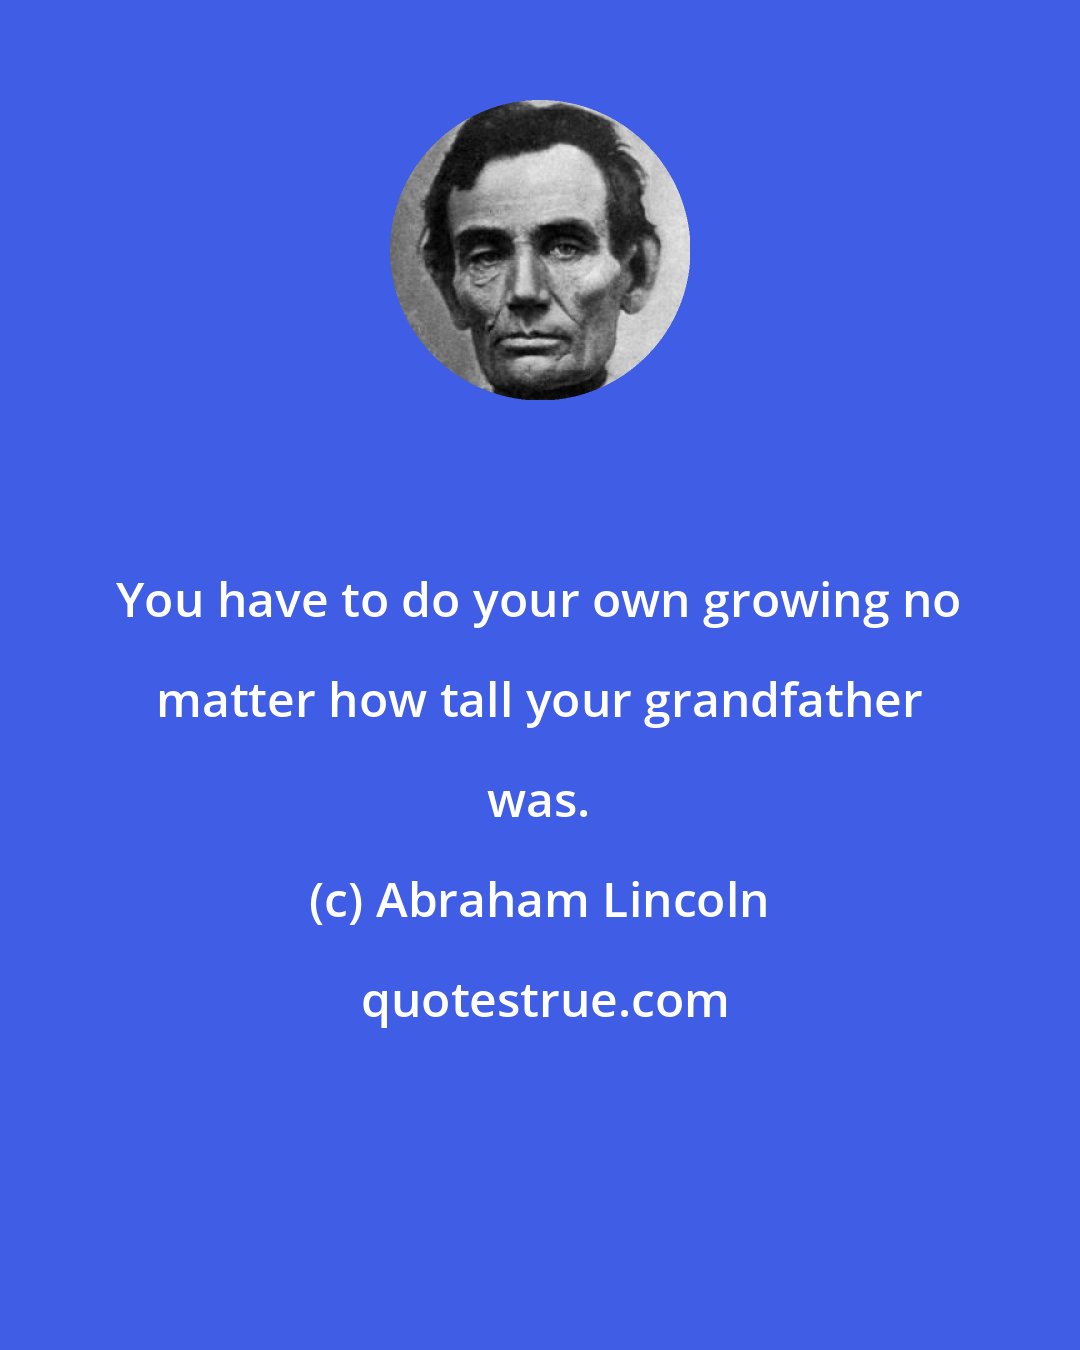 Abraham Lincoln: You have to do your own growing no matter how tall your grandfather was.